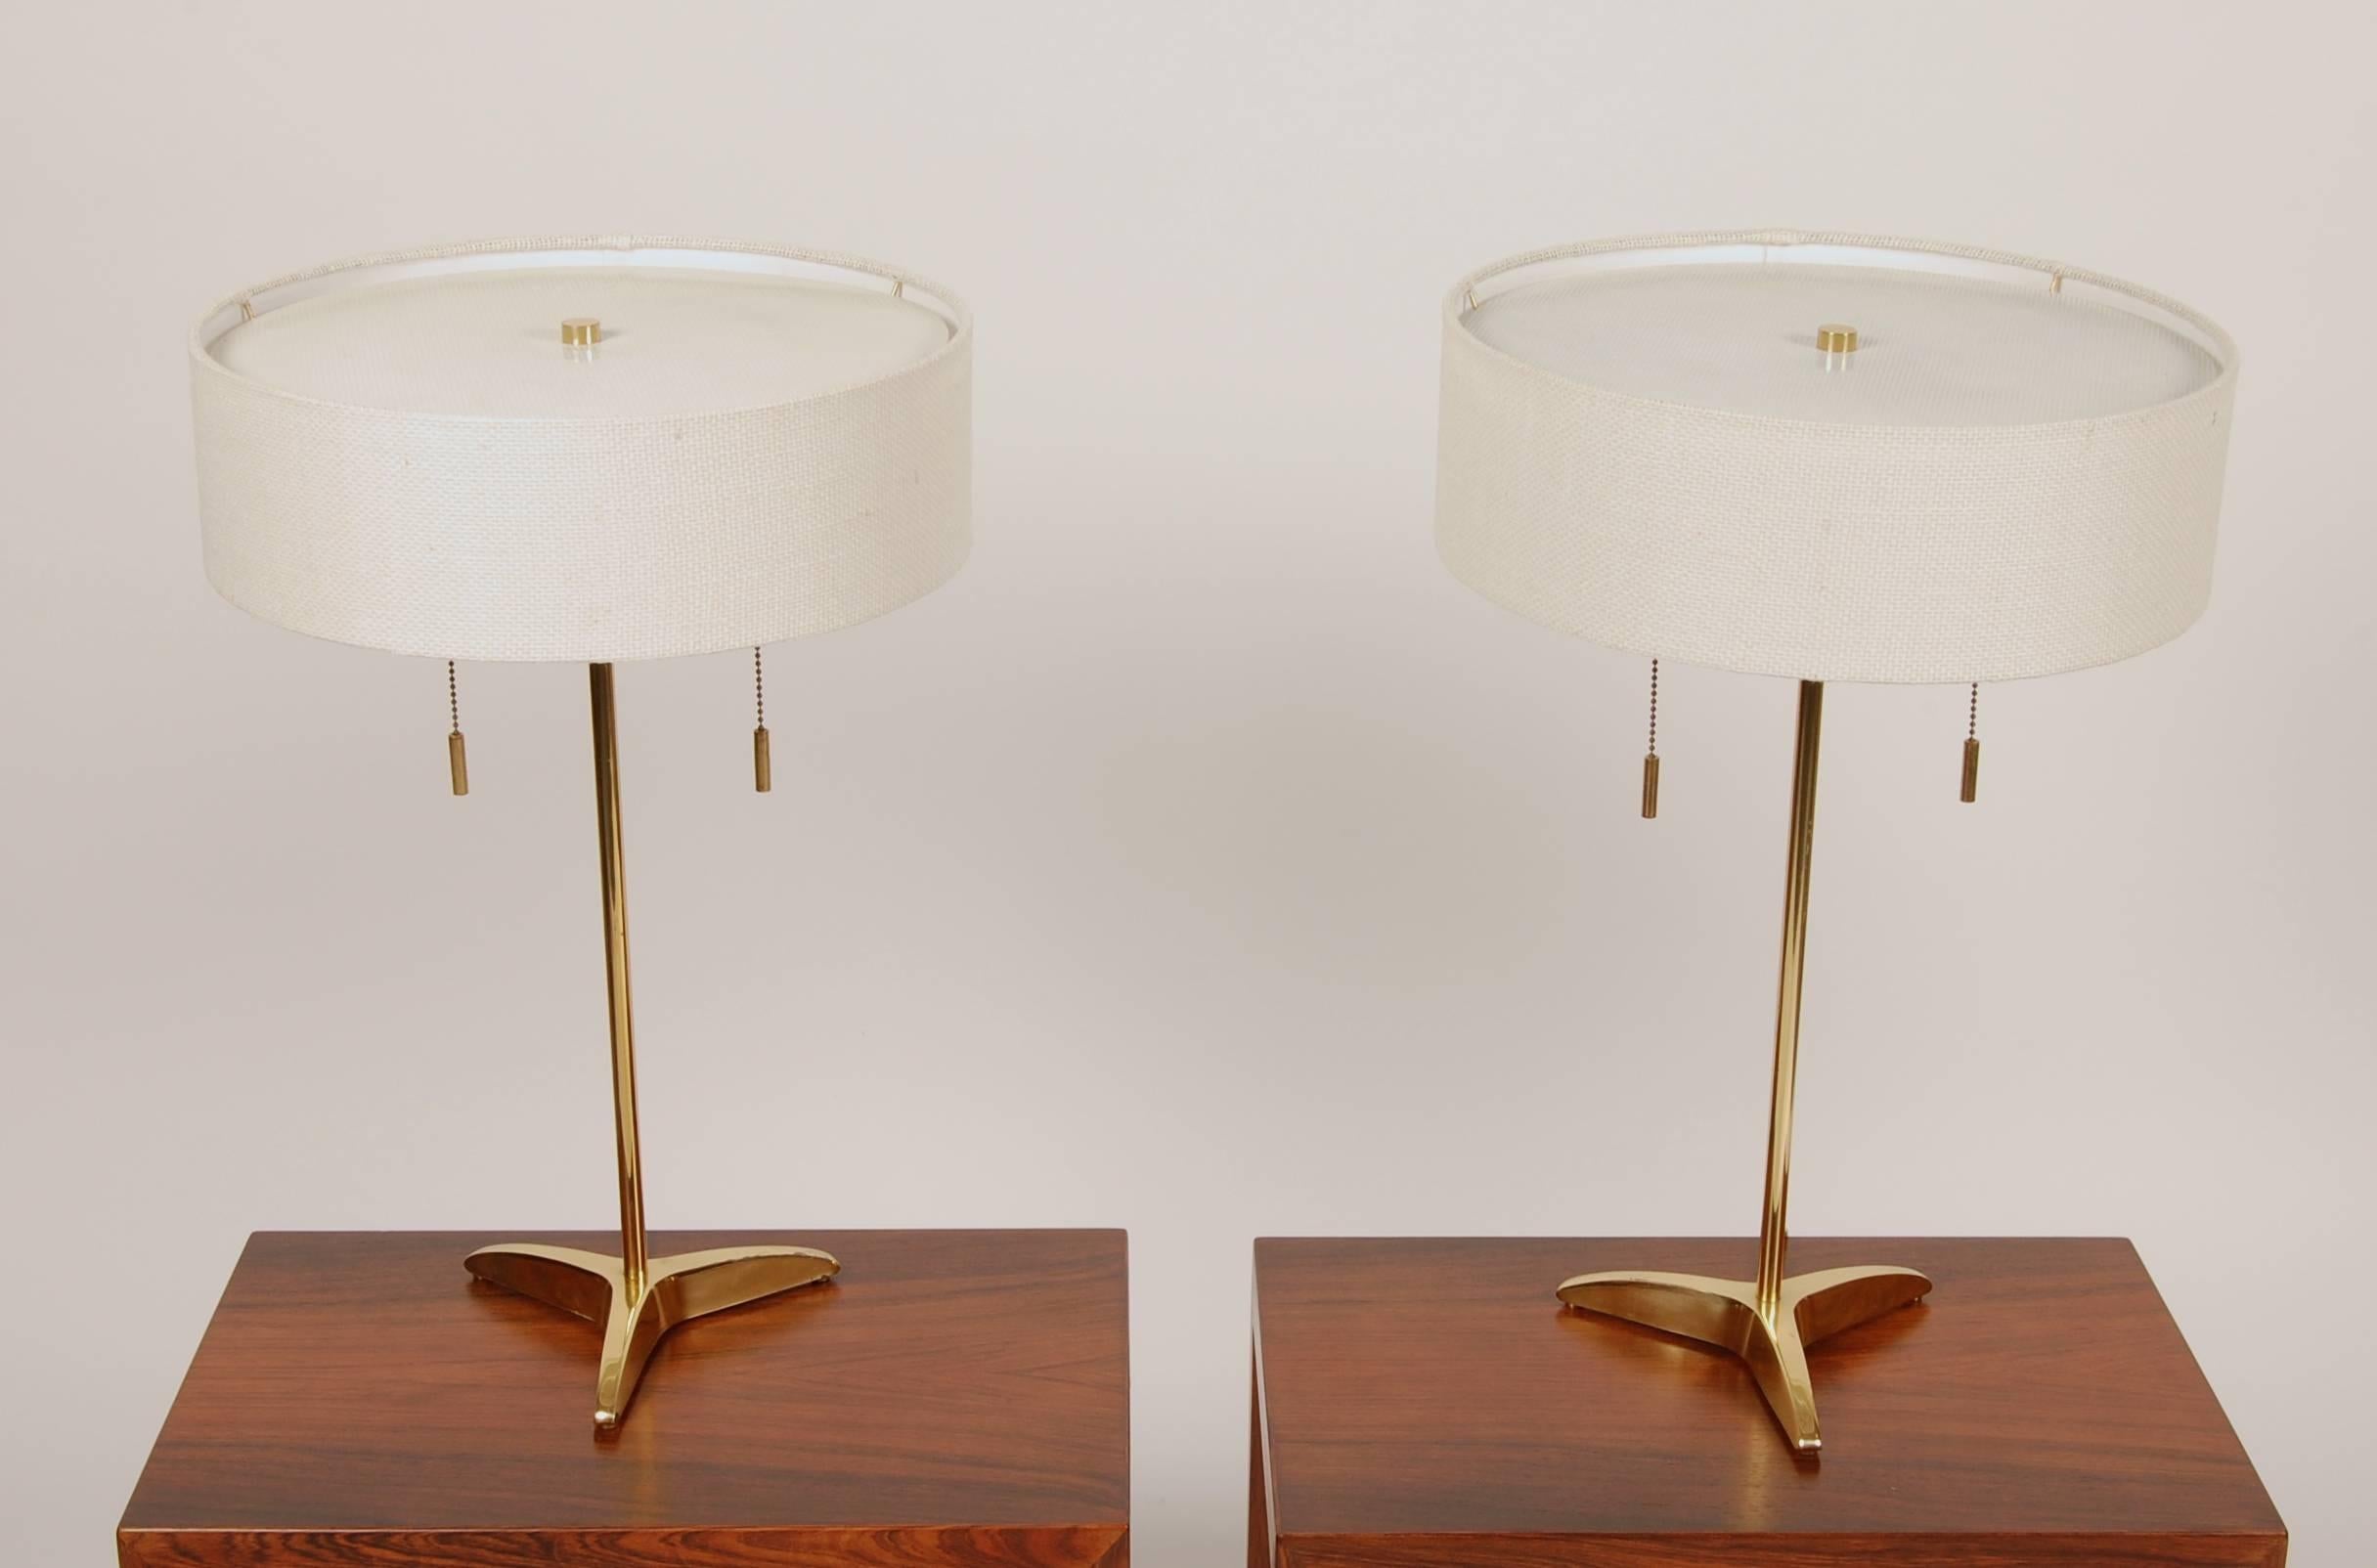 Matching brass table lamps by Stiffel of the United States, resting on angular tripod bases with slender stems that collimating to delicate linen drum shades and is topped by perforated metal diffusers. With new custom shades and rewired, each lamp